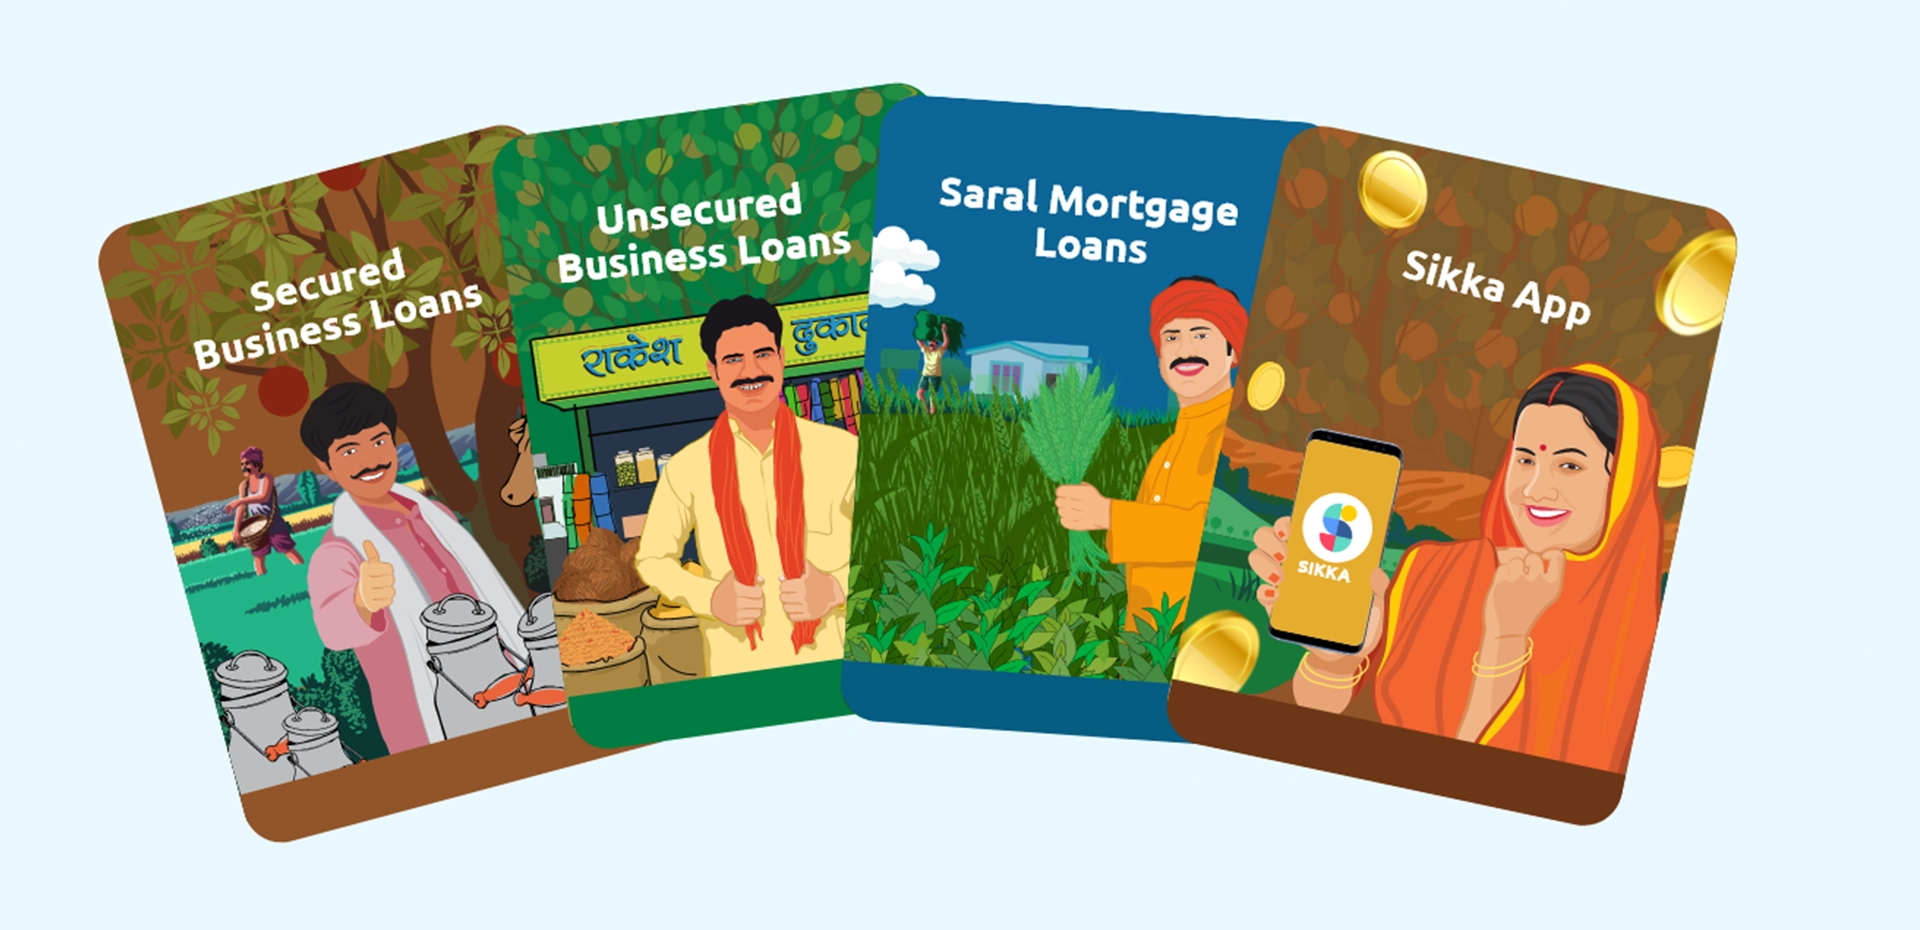 Cards showing Moneyboxx services - Secured business loan, Unsecured business loans, saral mortgage loans and Sikka App